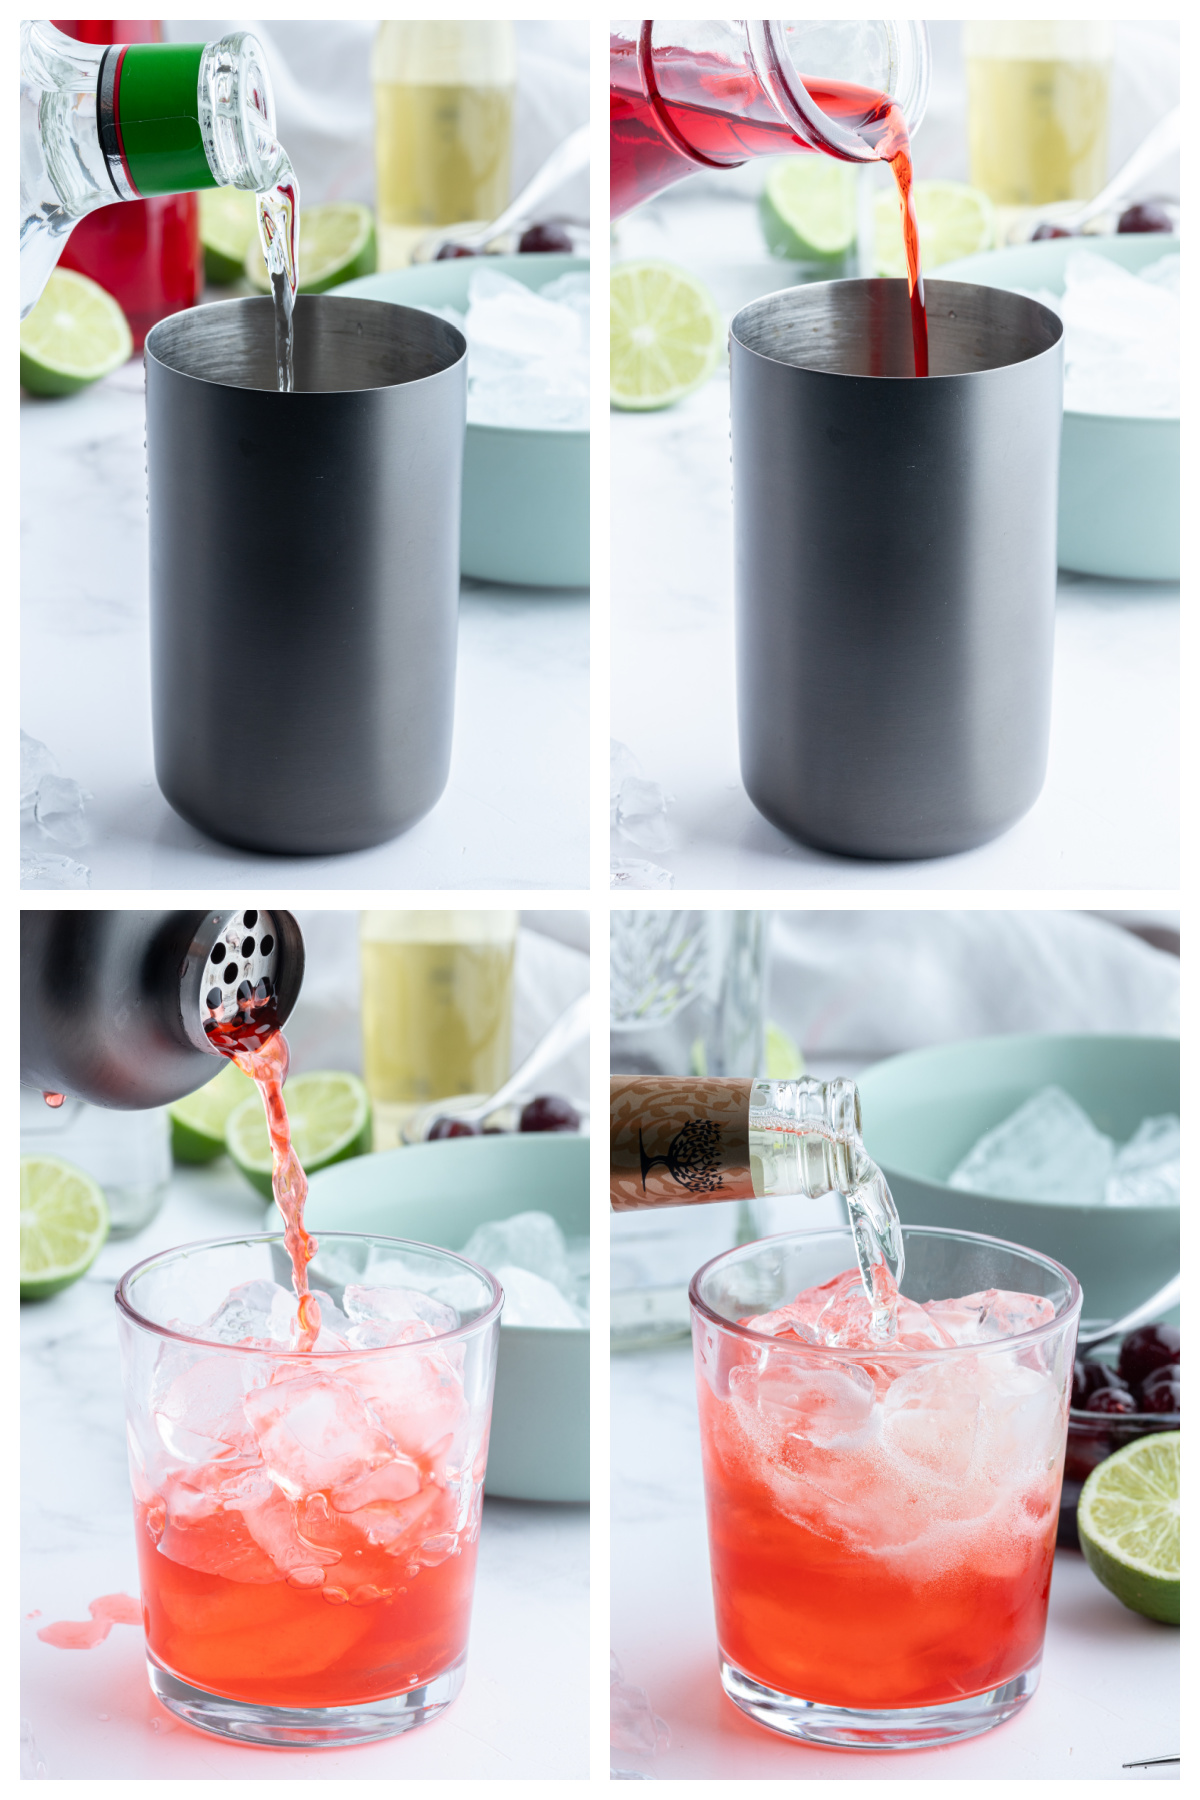 four photos showing how to make a tequila shirley temple